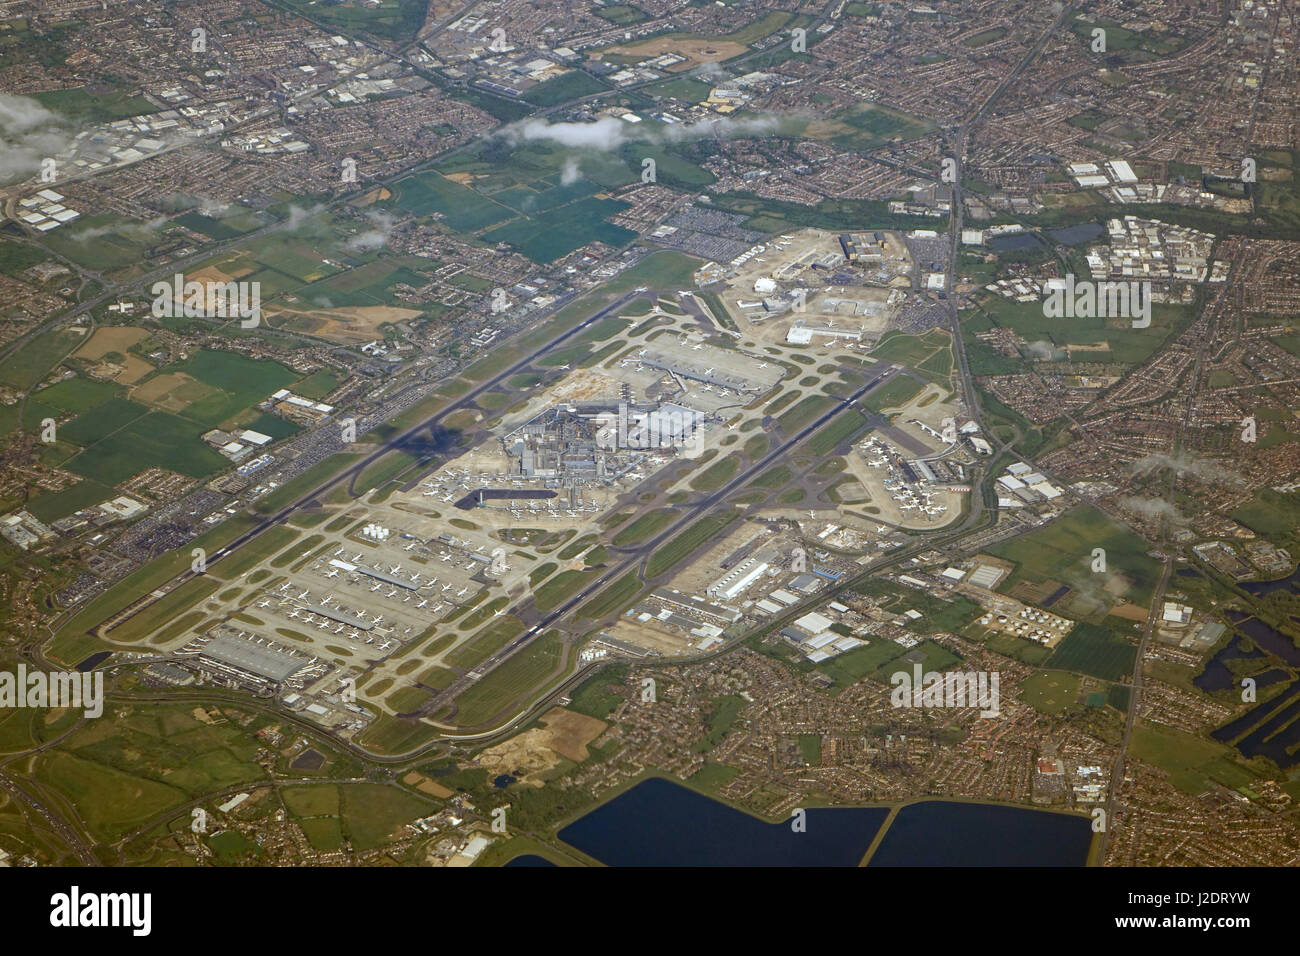 London Heathrow airport with 100 aircraft seen from above Stock Photo